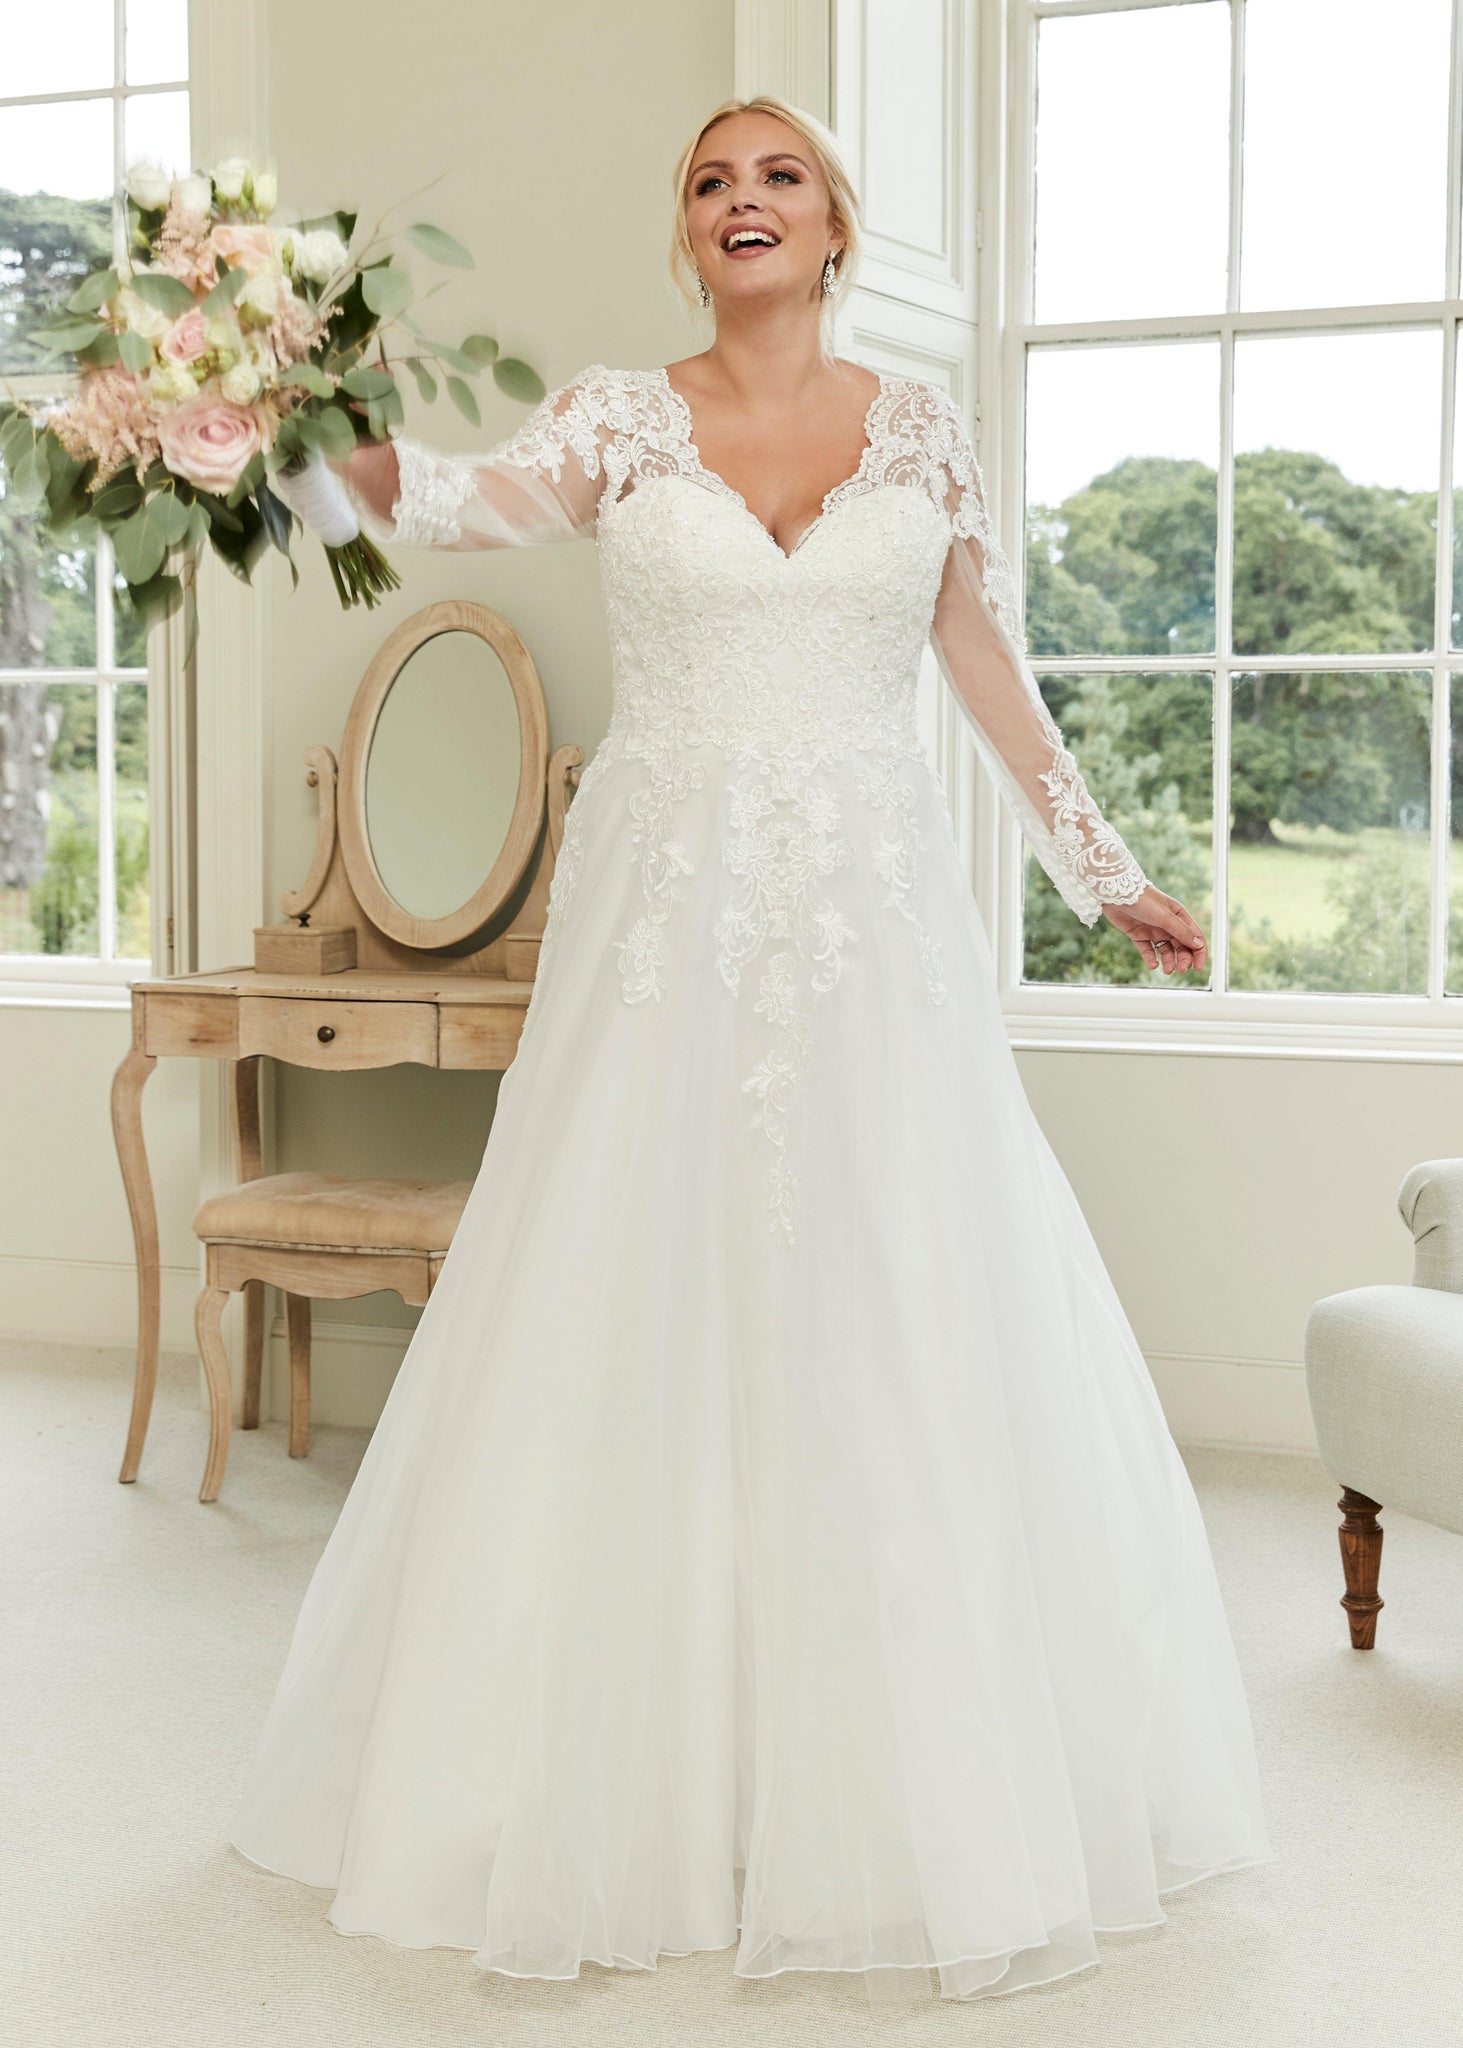 UK26 LaceyMae - Adore Bridal and Occasion Wear